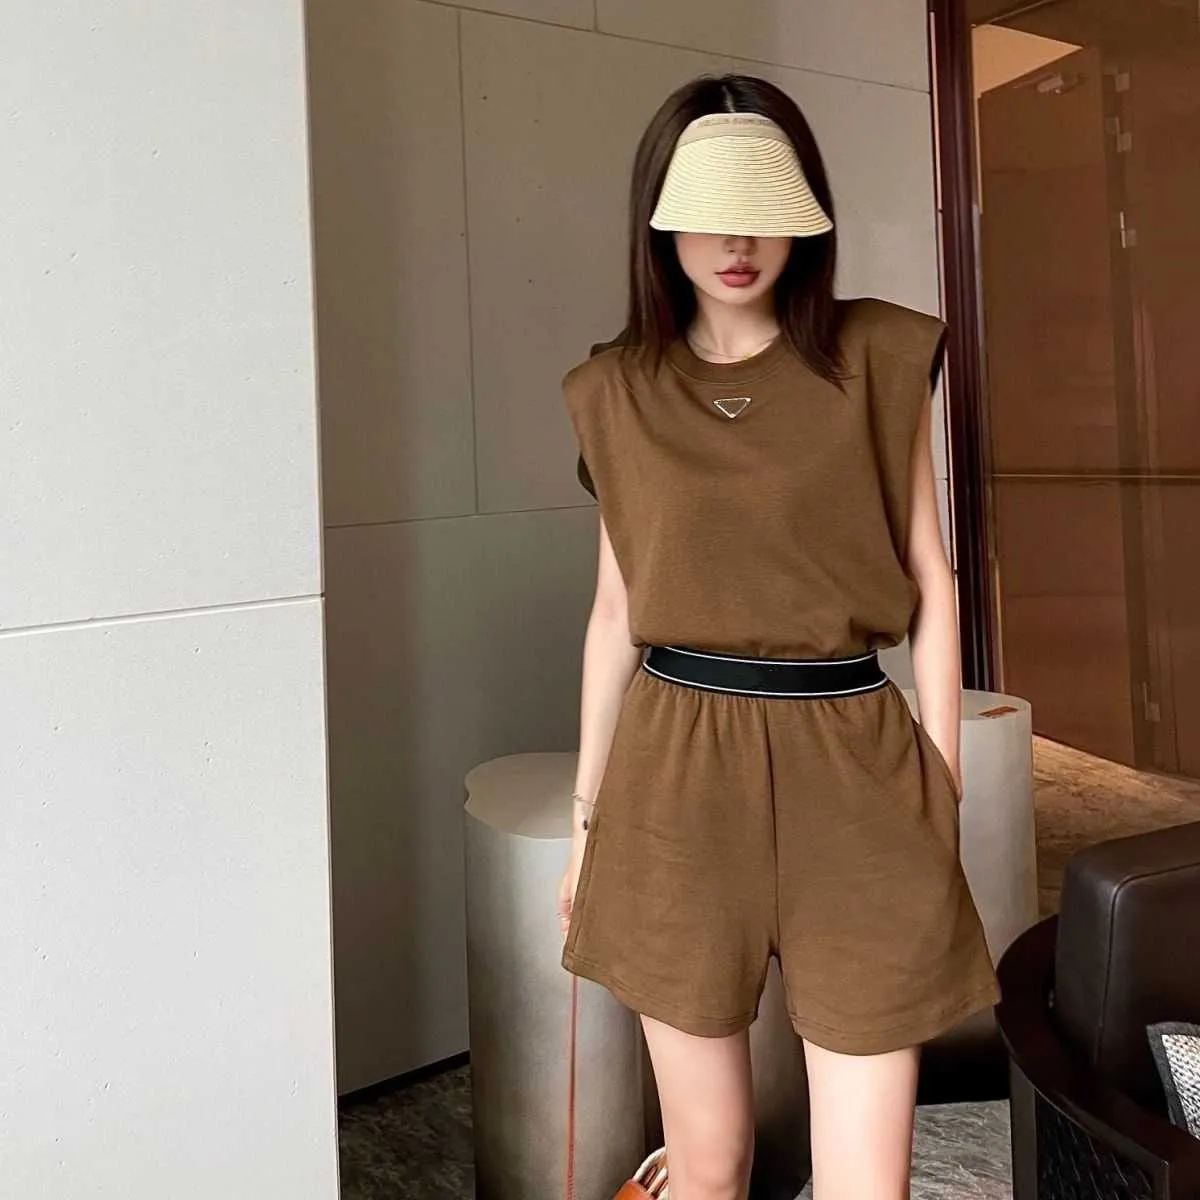 Summer women's sleeveless short sleeve shorts casual fashion suit, acrylic fabric soft and comfortable, loose version of leisure fashion.